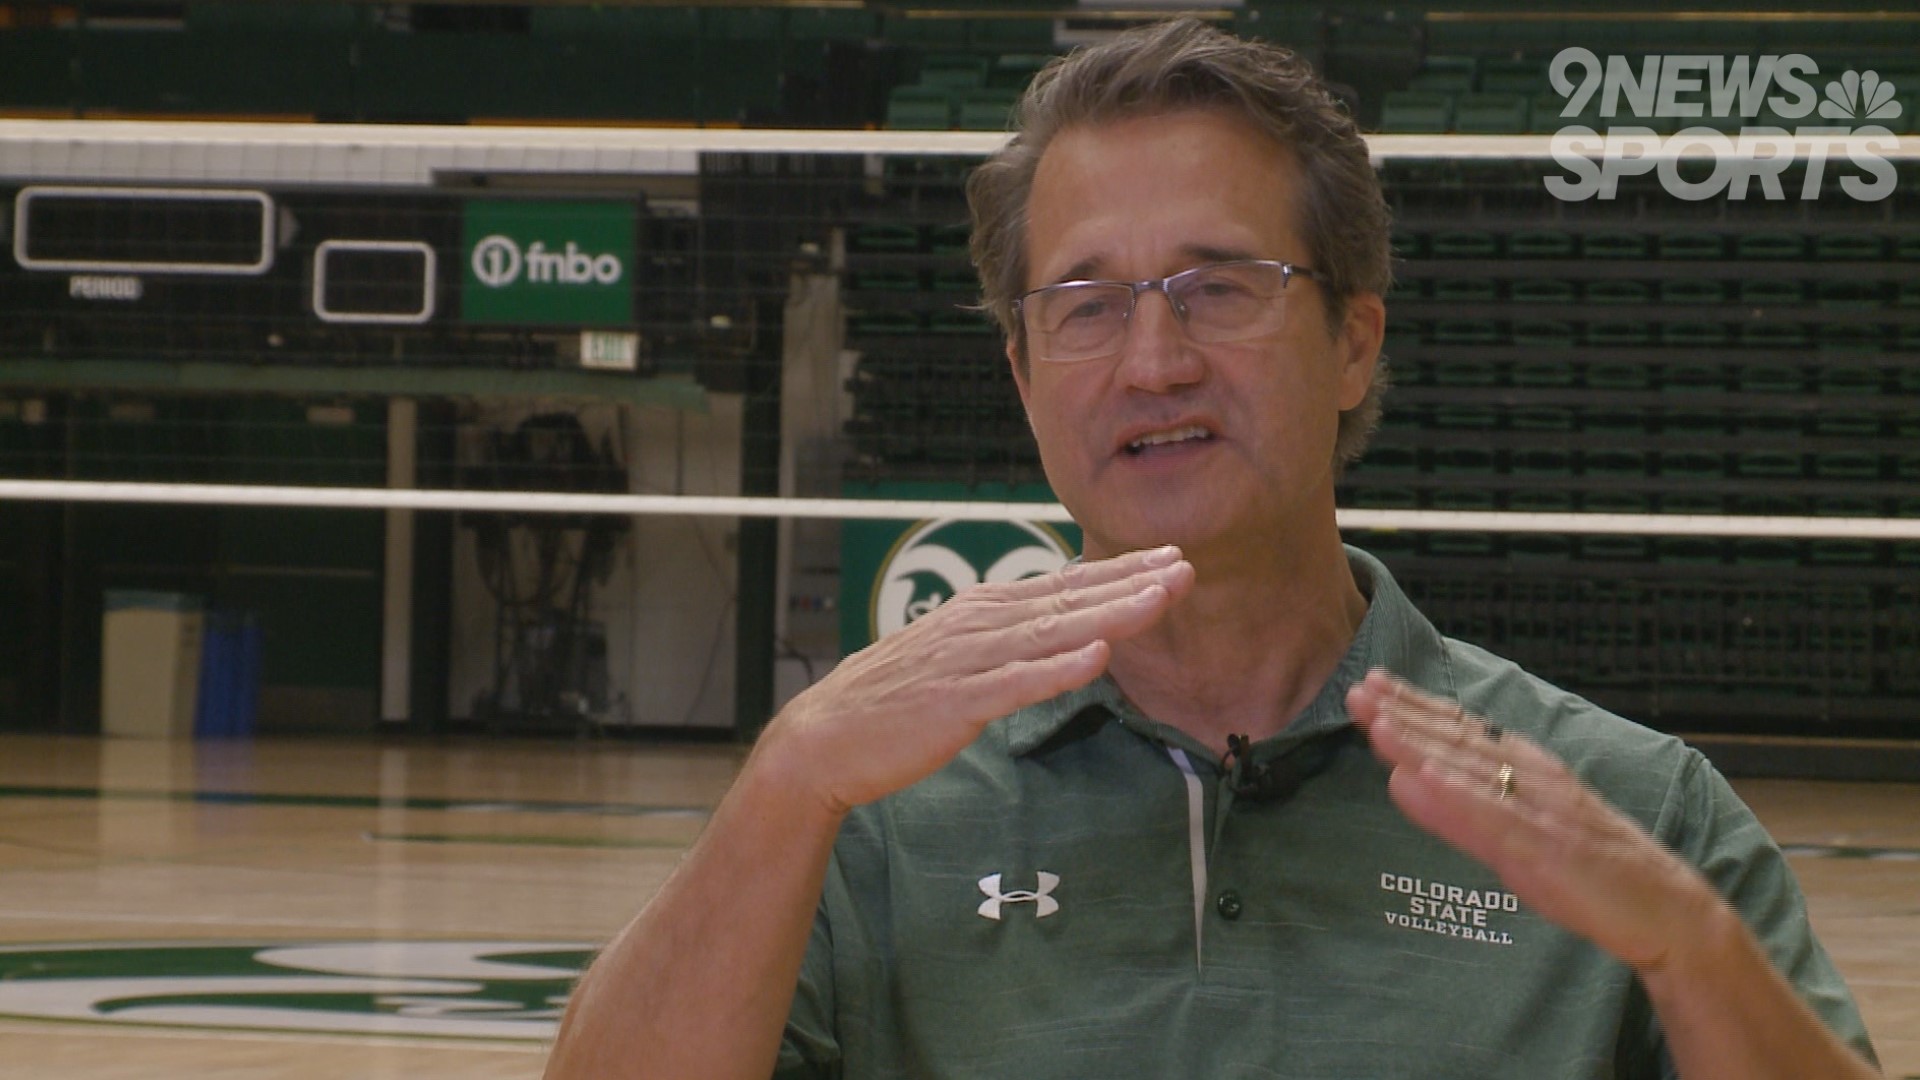 Hilbert has been an icon for the Colorado State program for decades.